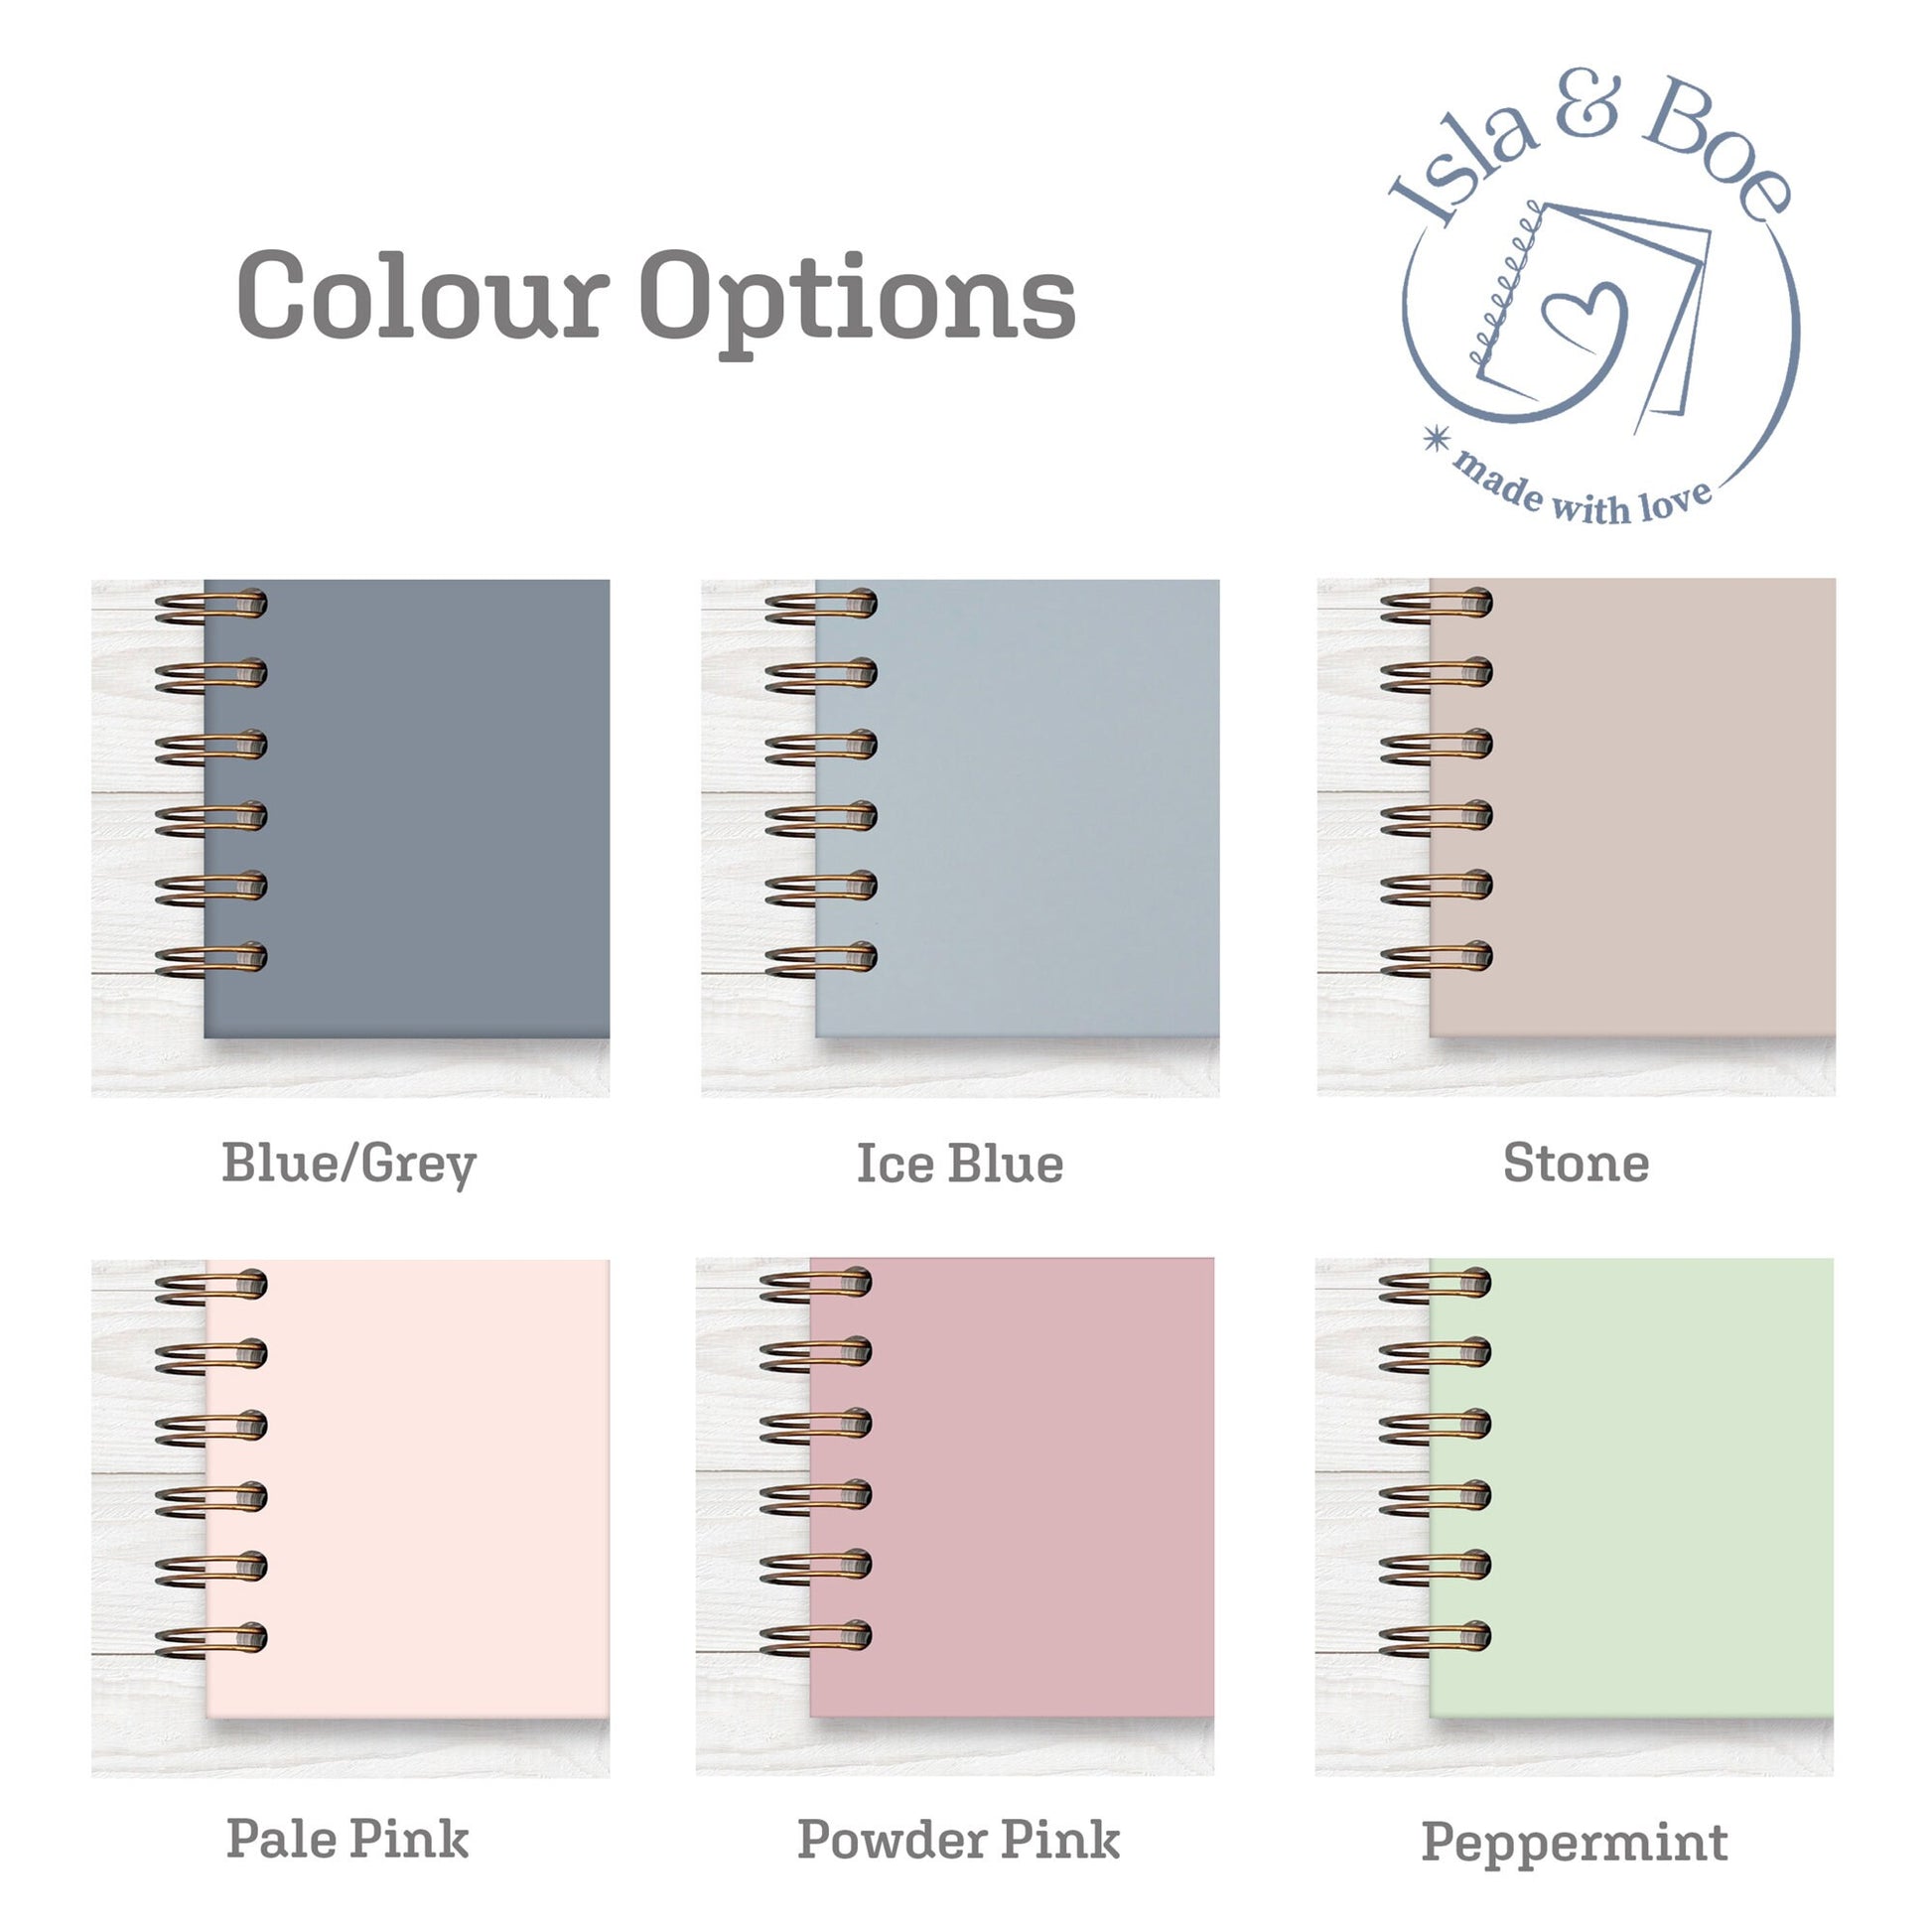 A colour example chart showing the availible colours for the memory book covers. There is Blue/Grey, Ice Blue, Stone, Pale Pink, Powder Pink and Peppermint